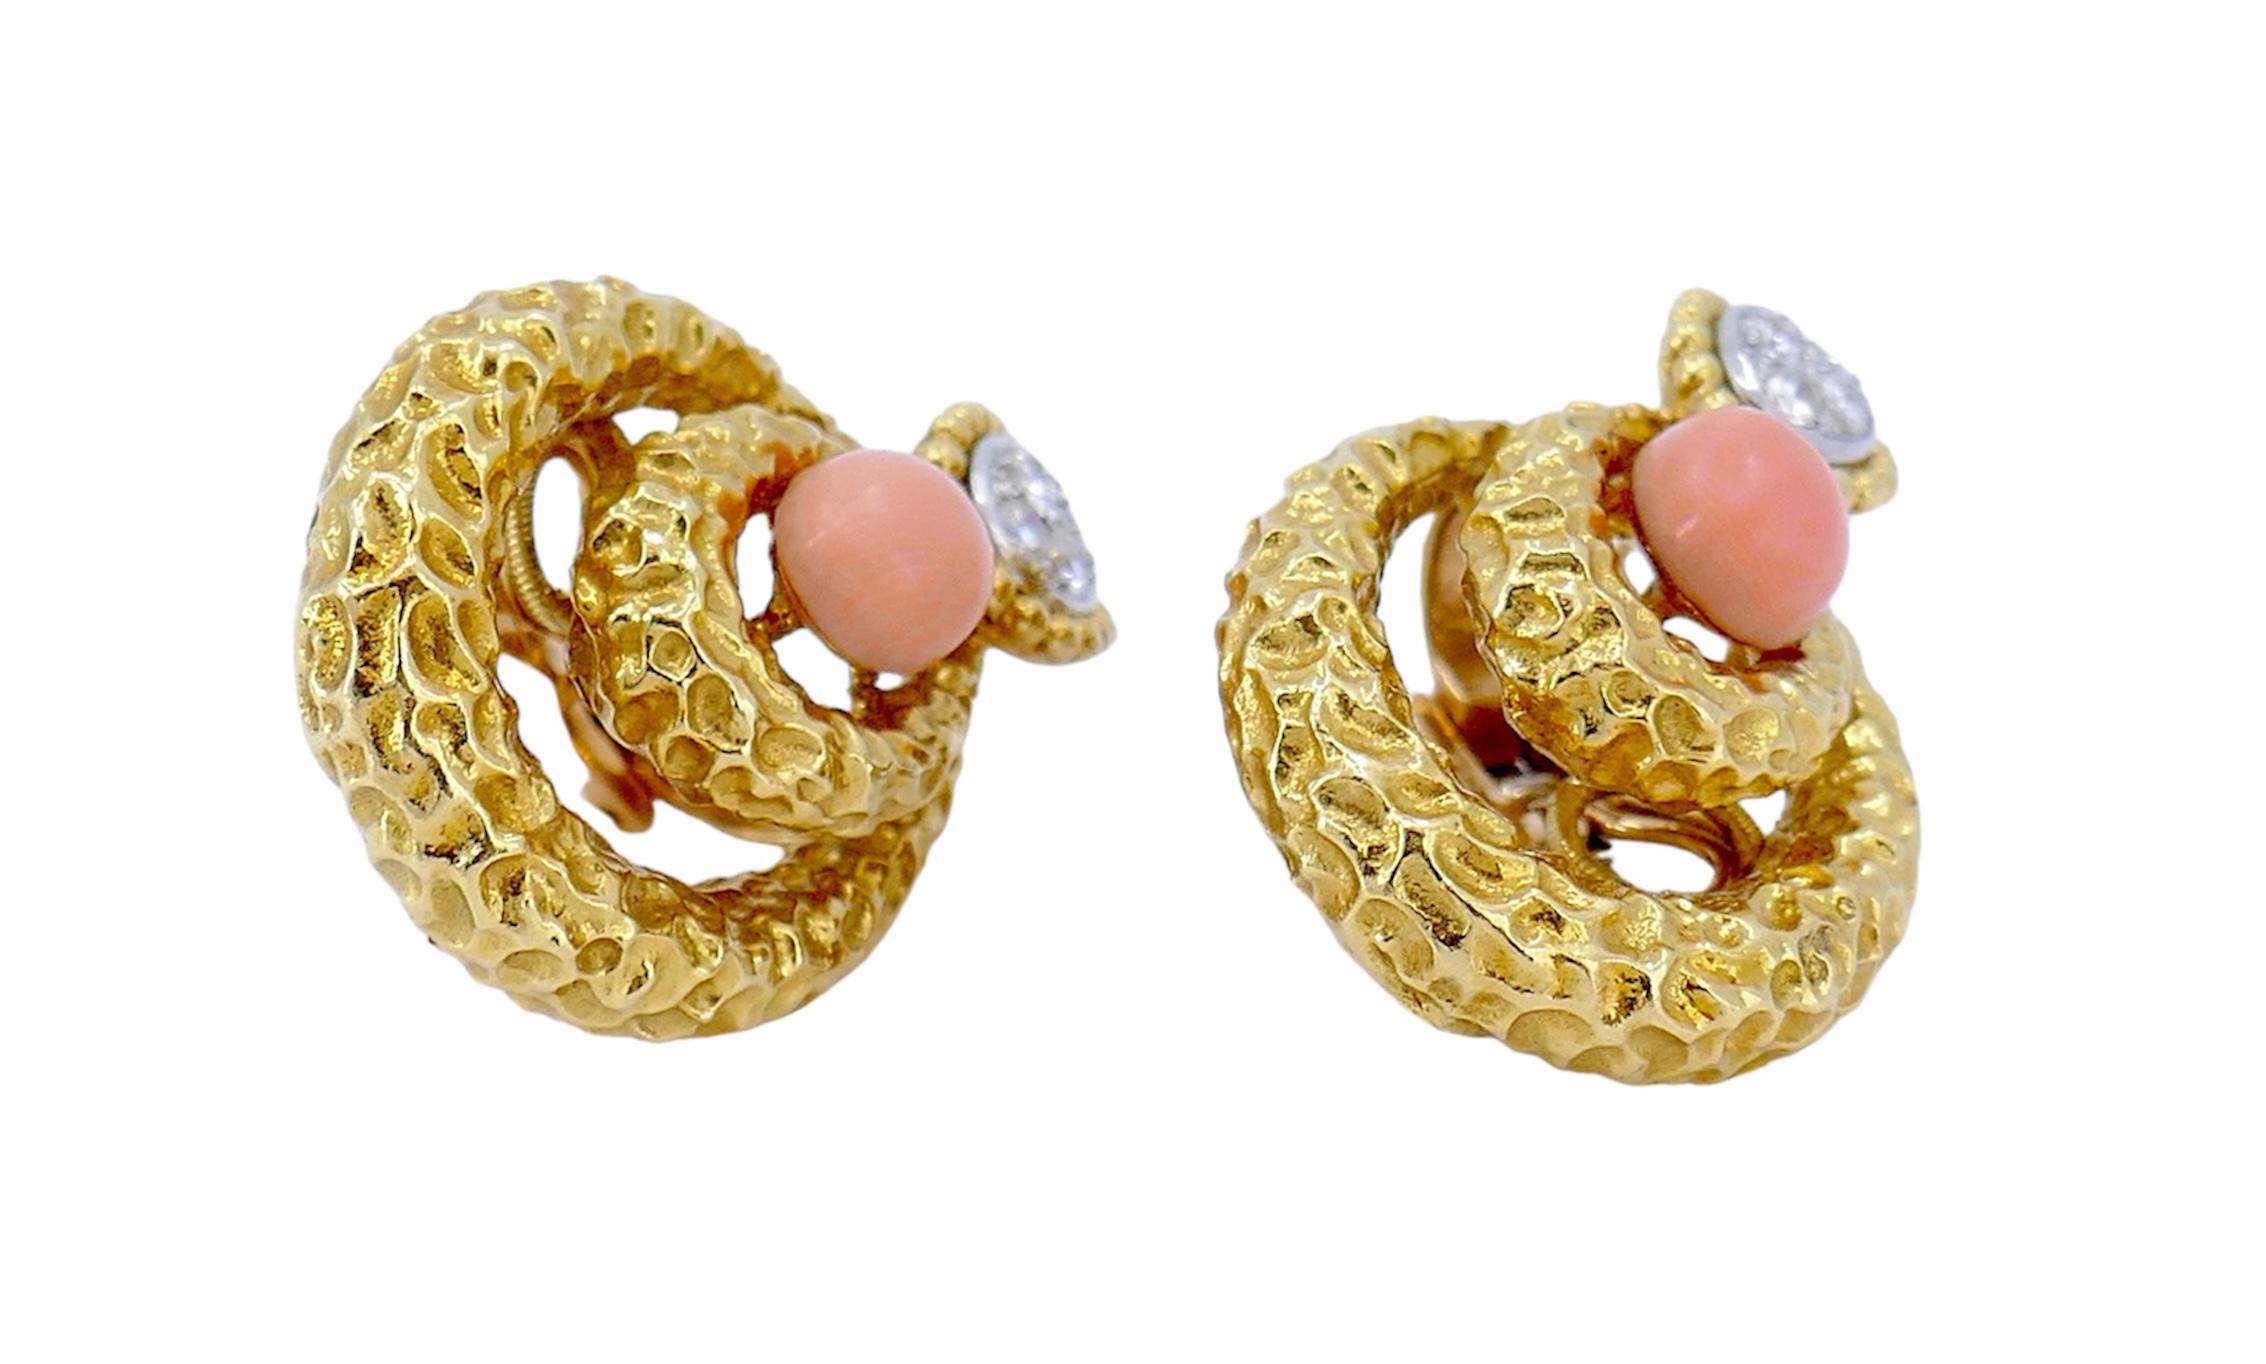 Mauboussin Paris 18k Hammered Gold Diamond Coral Earrings For Sale 4